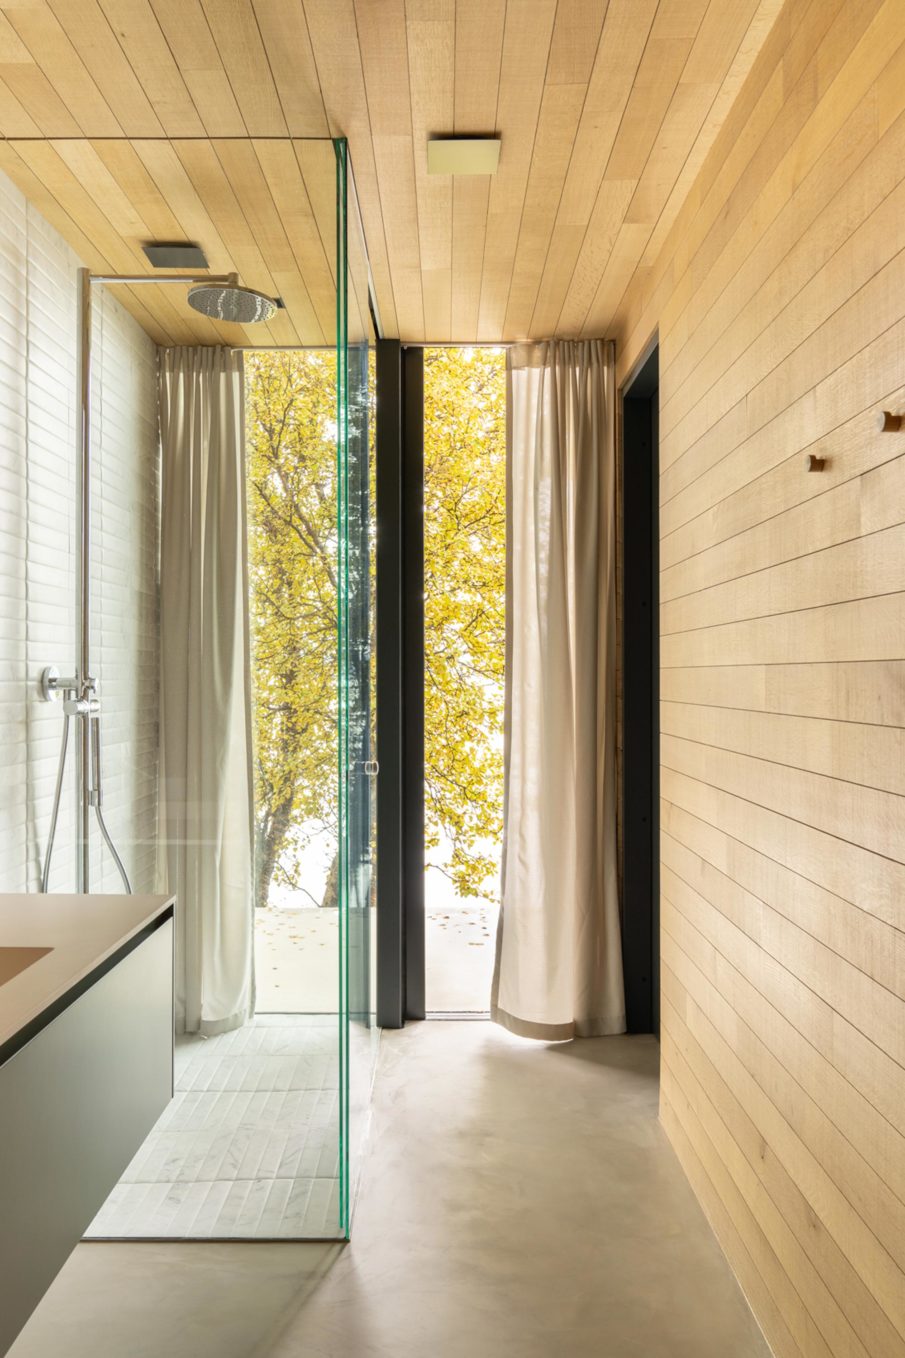 A part of a bathroom with a shower and large windows with curtains that can be drawn.